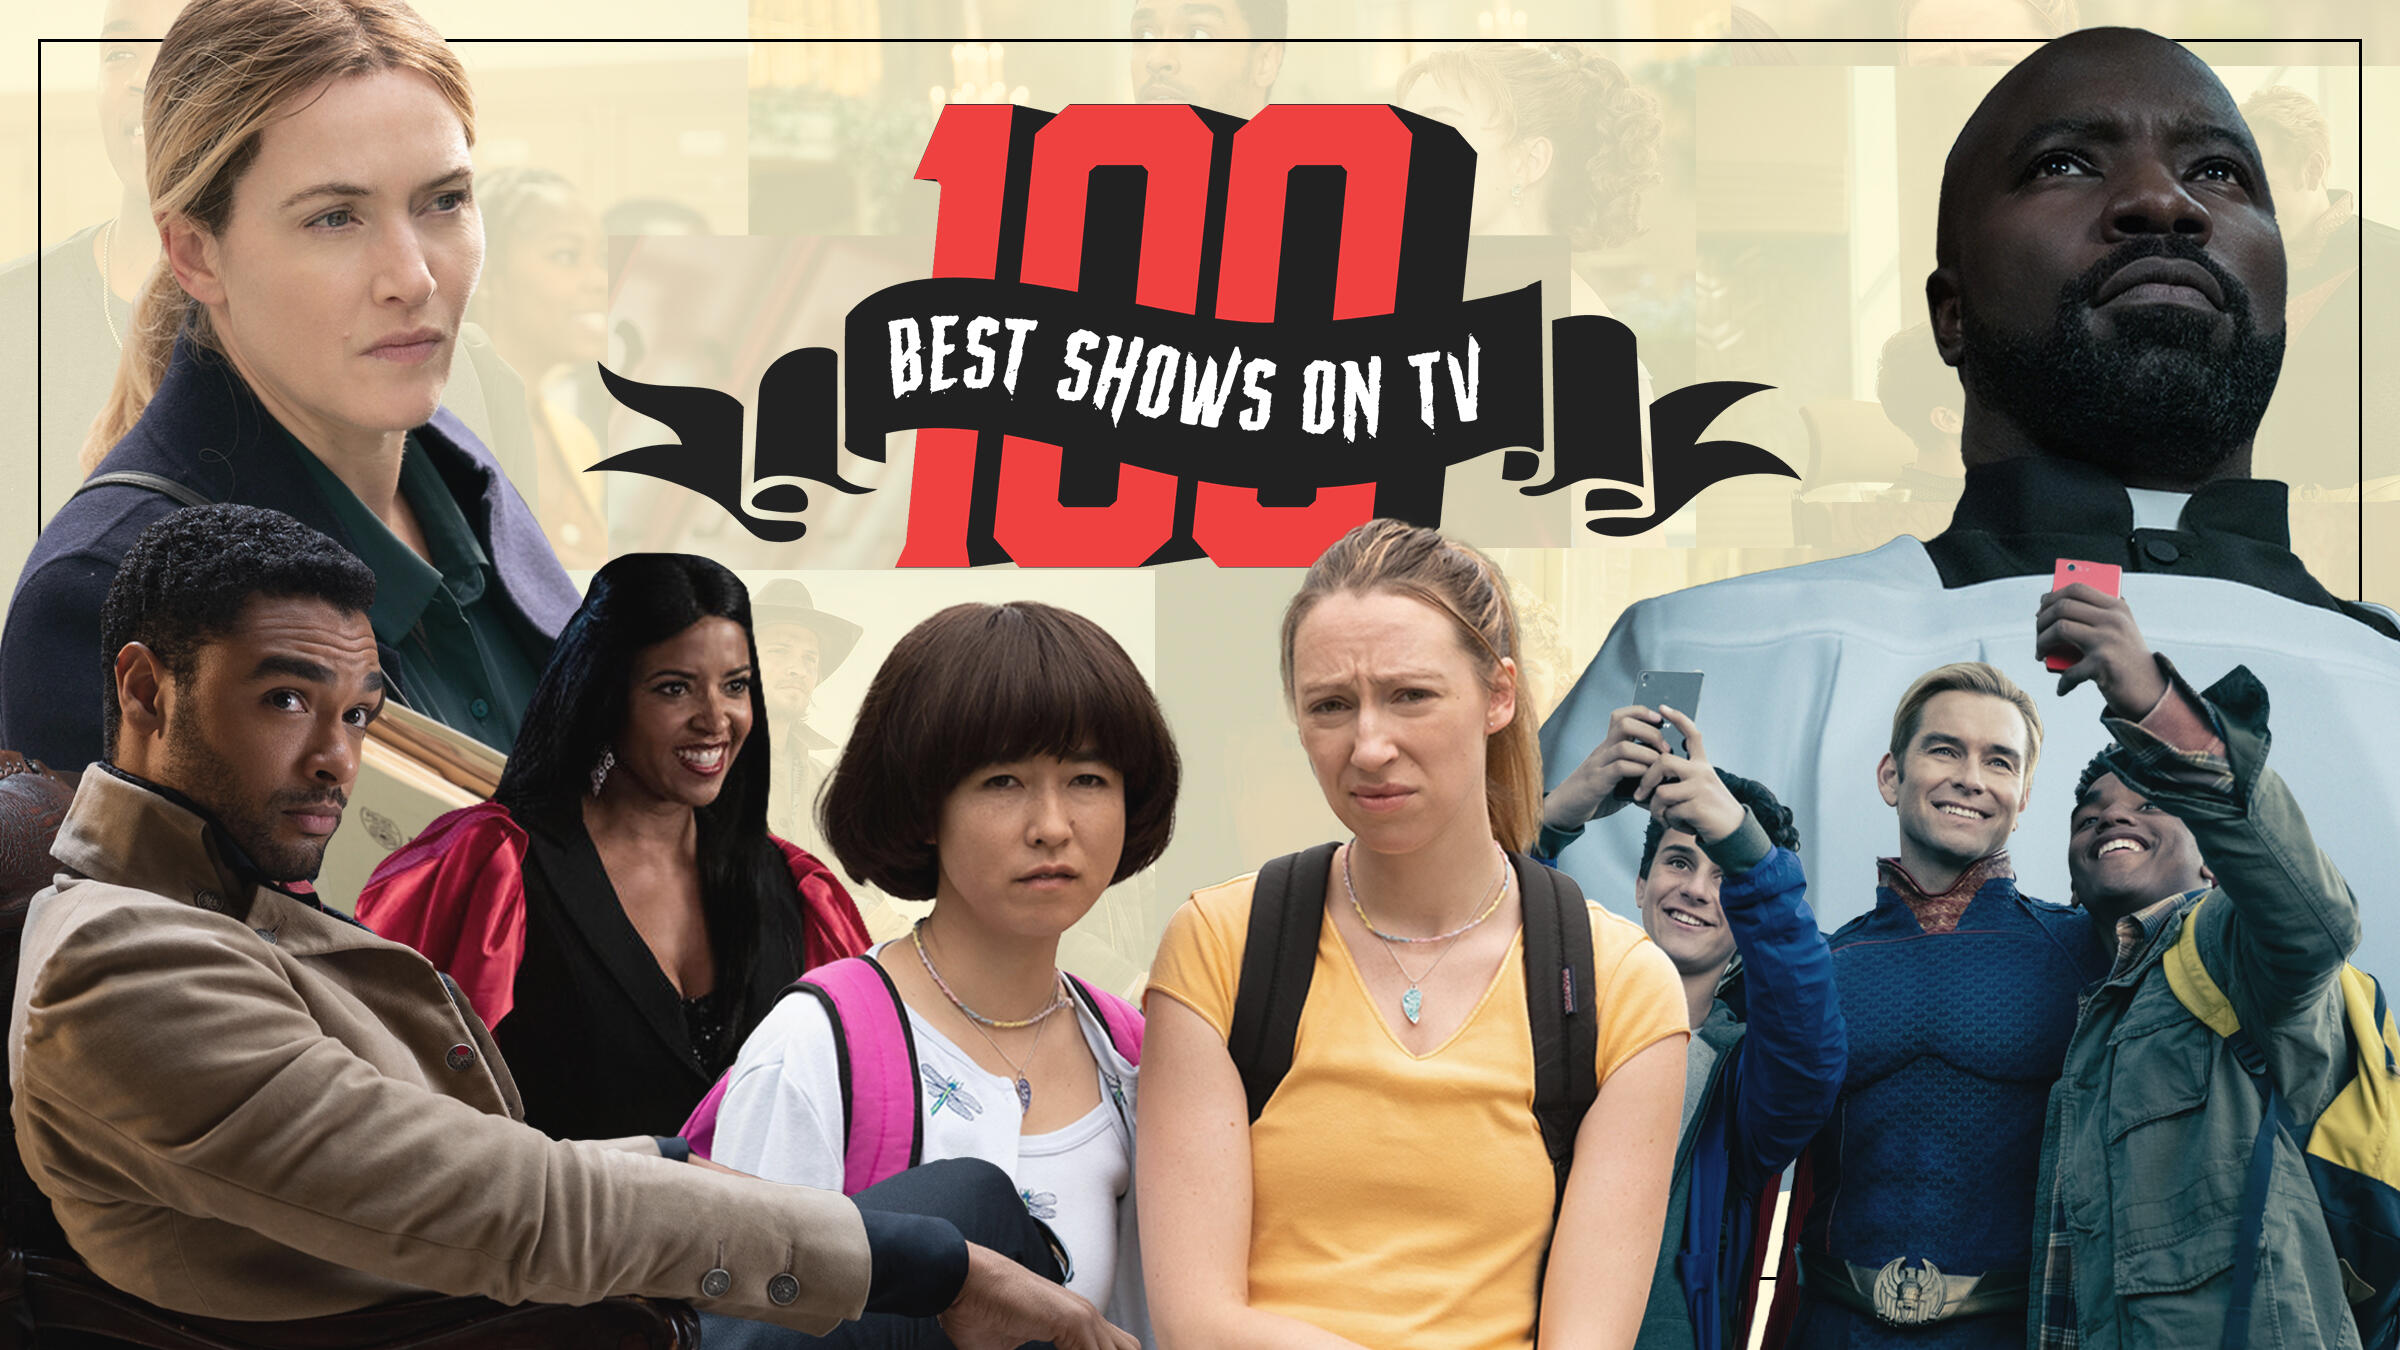 TV Guide Ranks the 100 Best Shows on TV Right